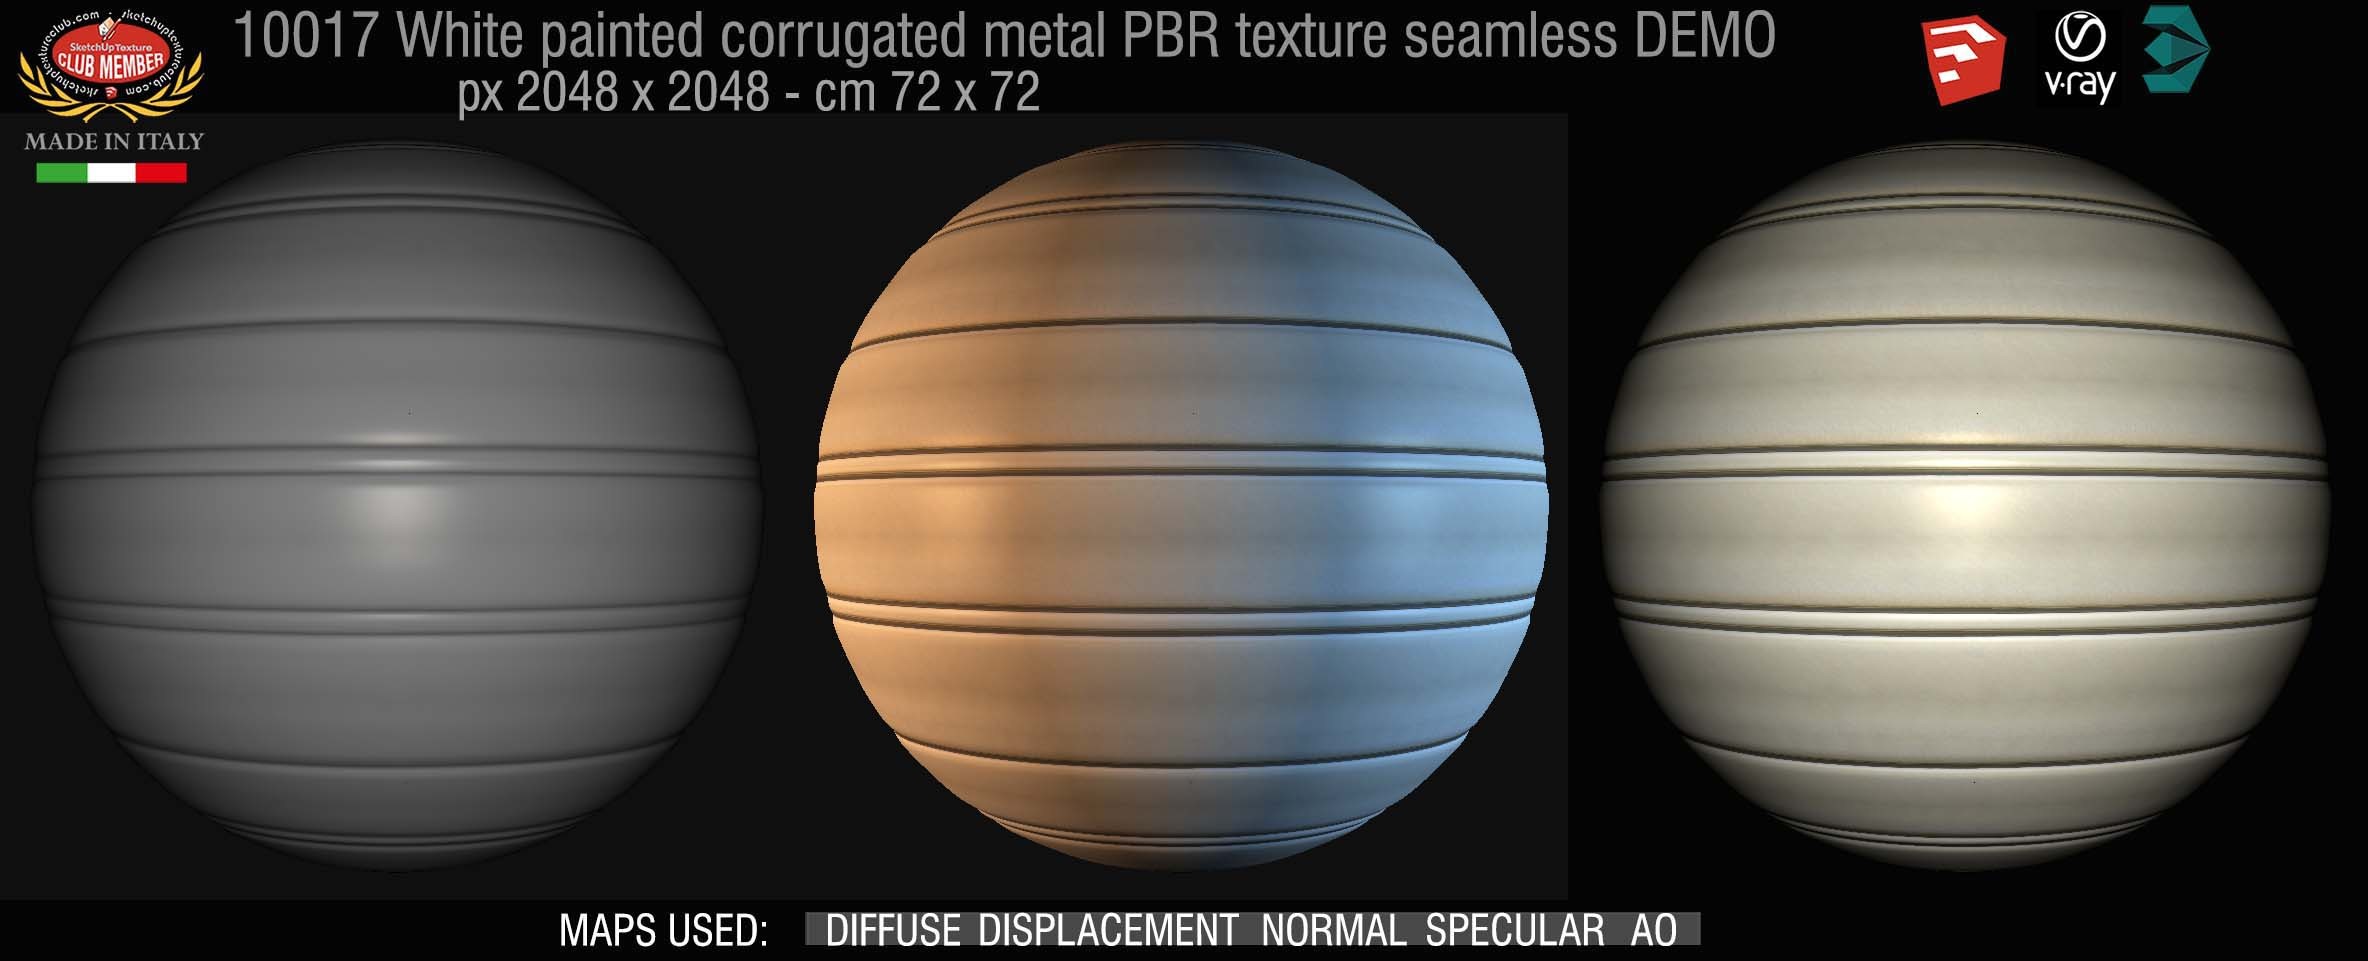 10017 Painted corrugated metal PBR texture seamless DEMO